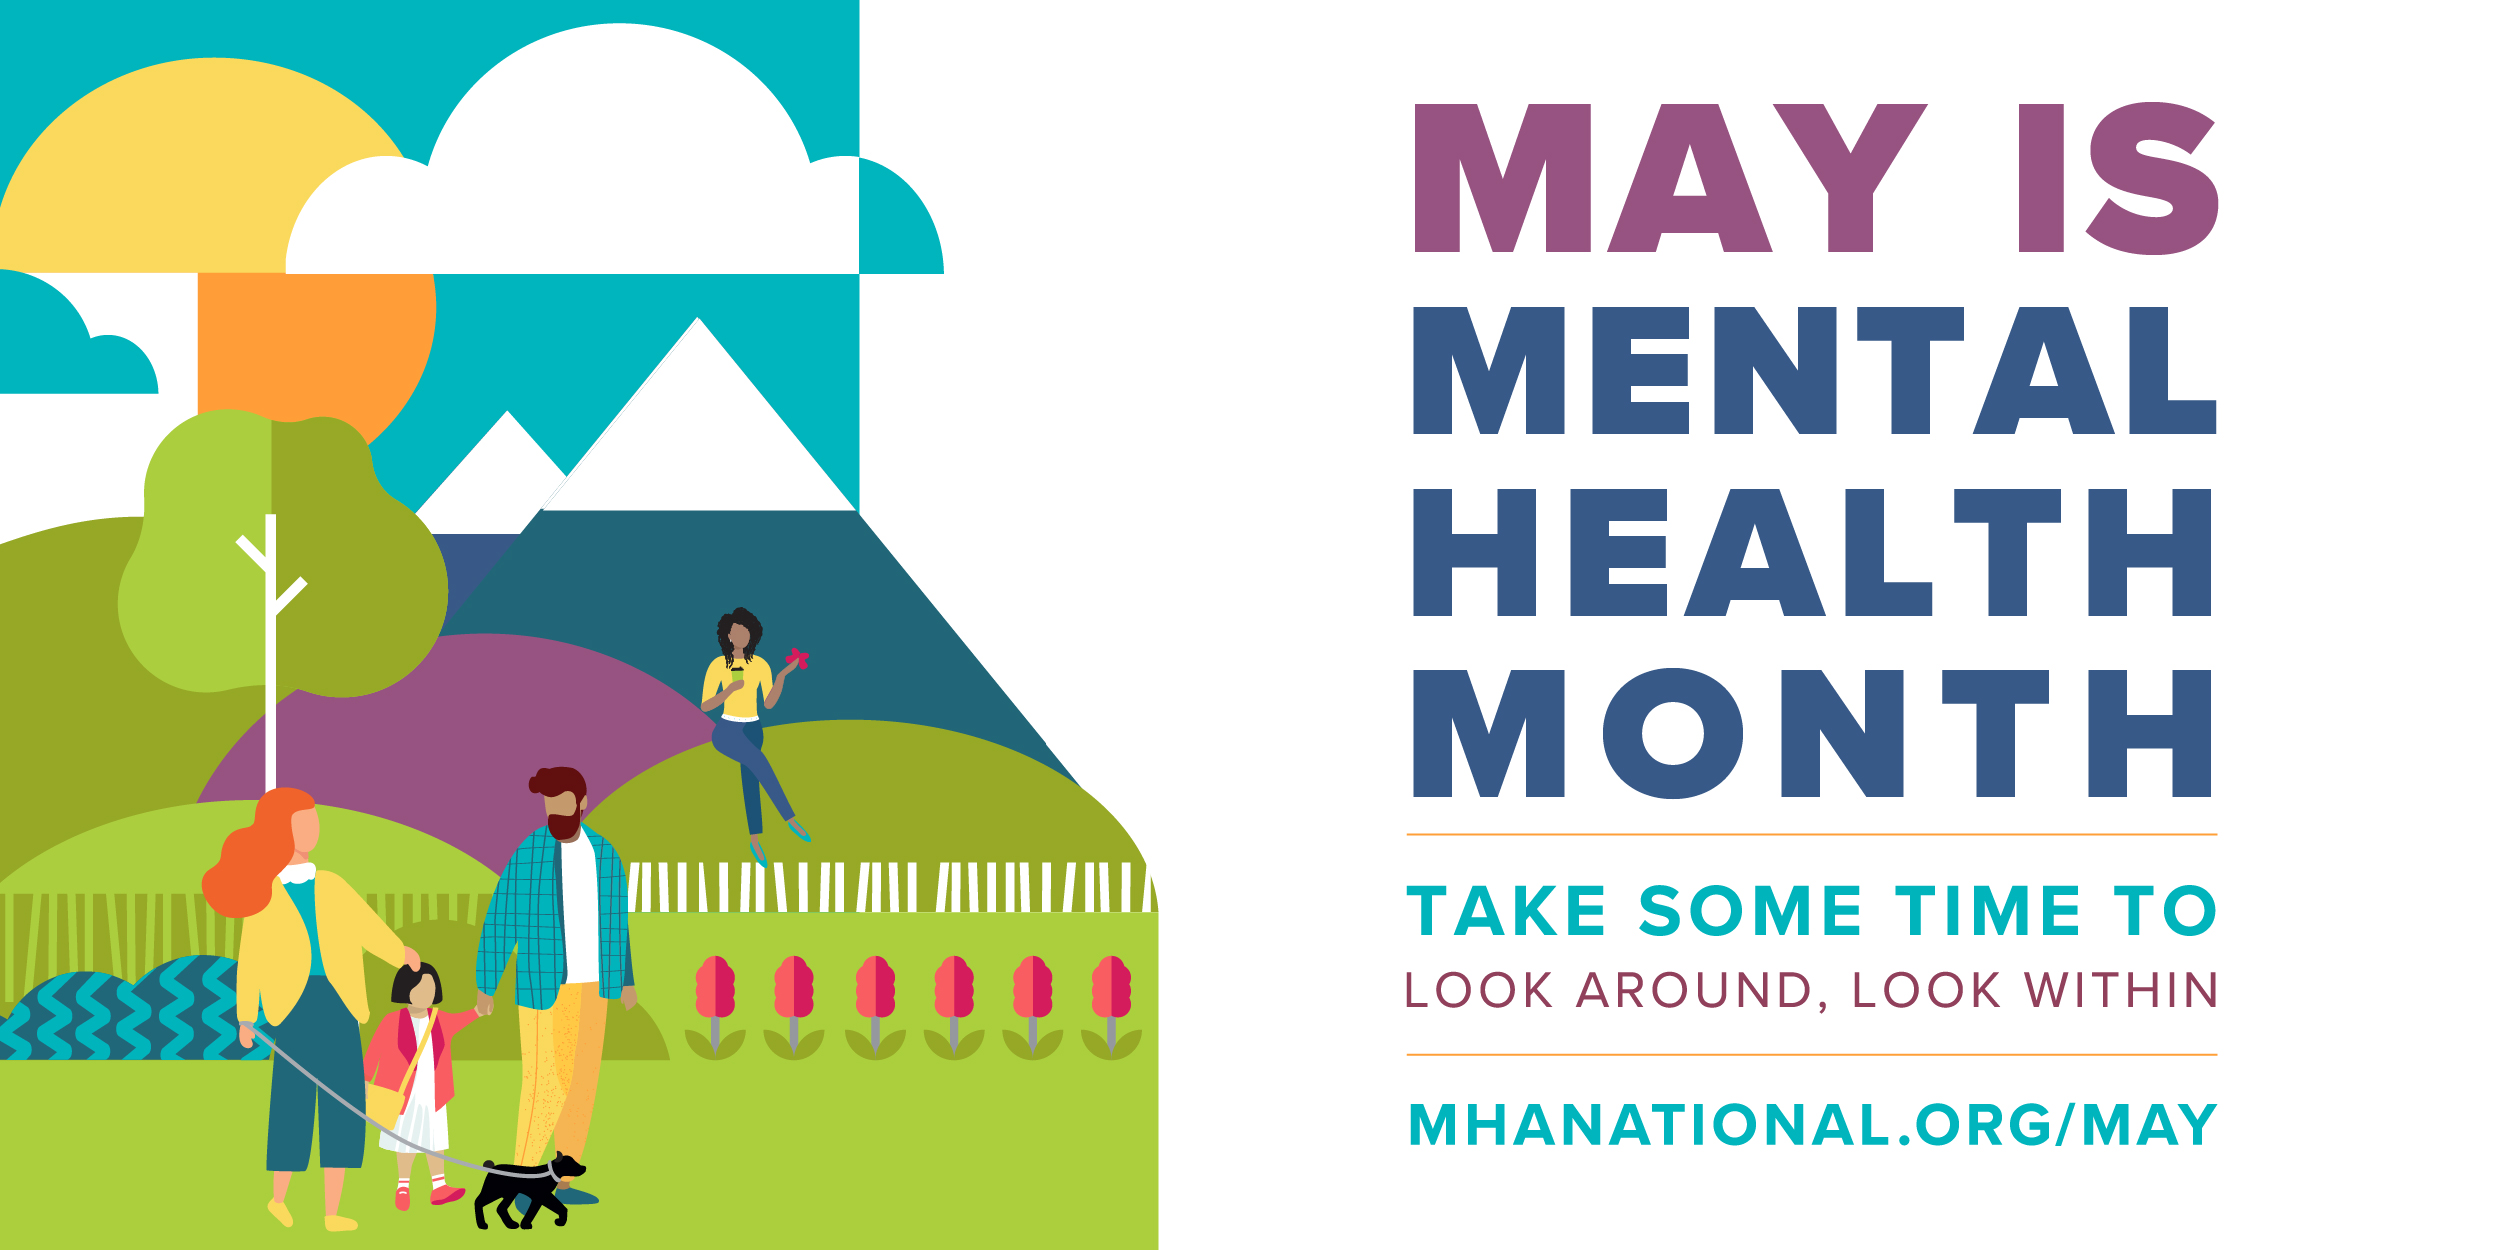 May is Mental Health Month | Take some time to Look Around, Look Within | mhanational.org/may